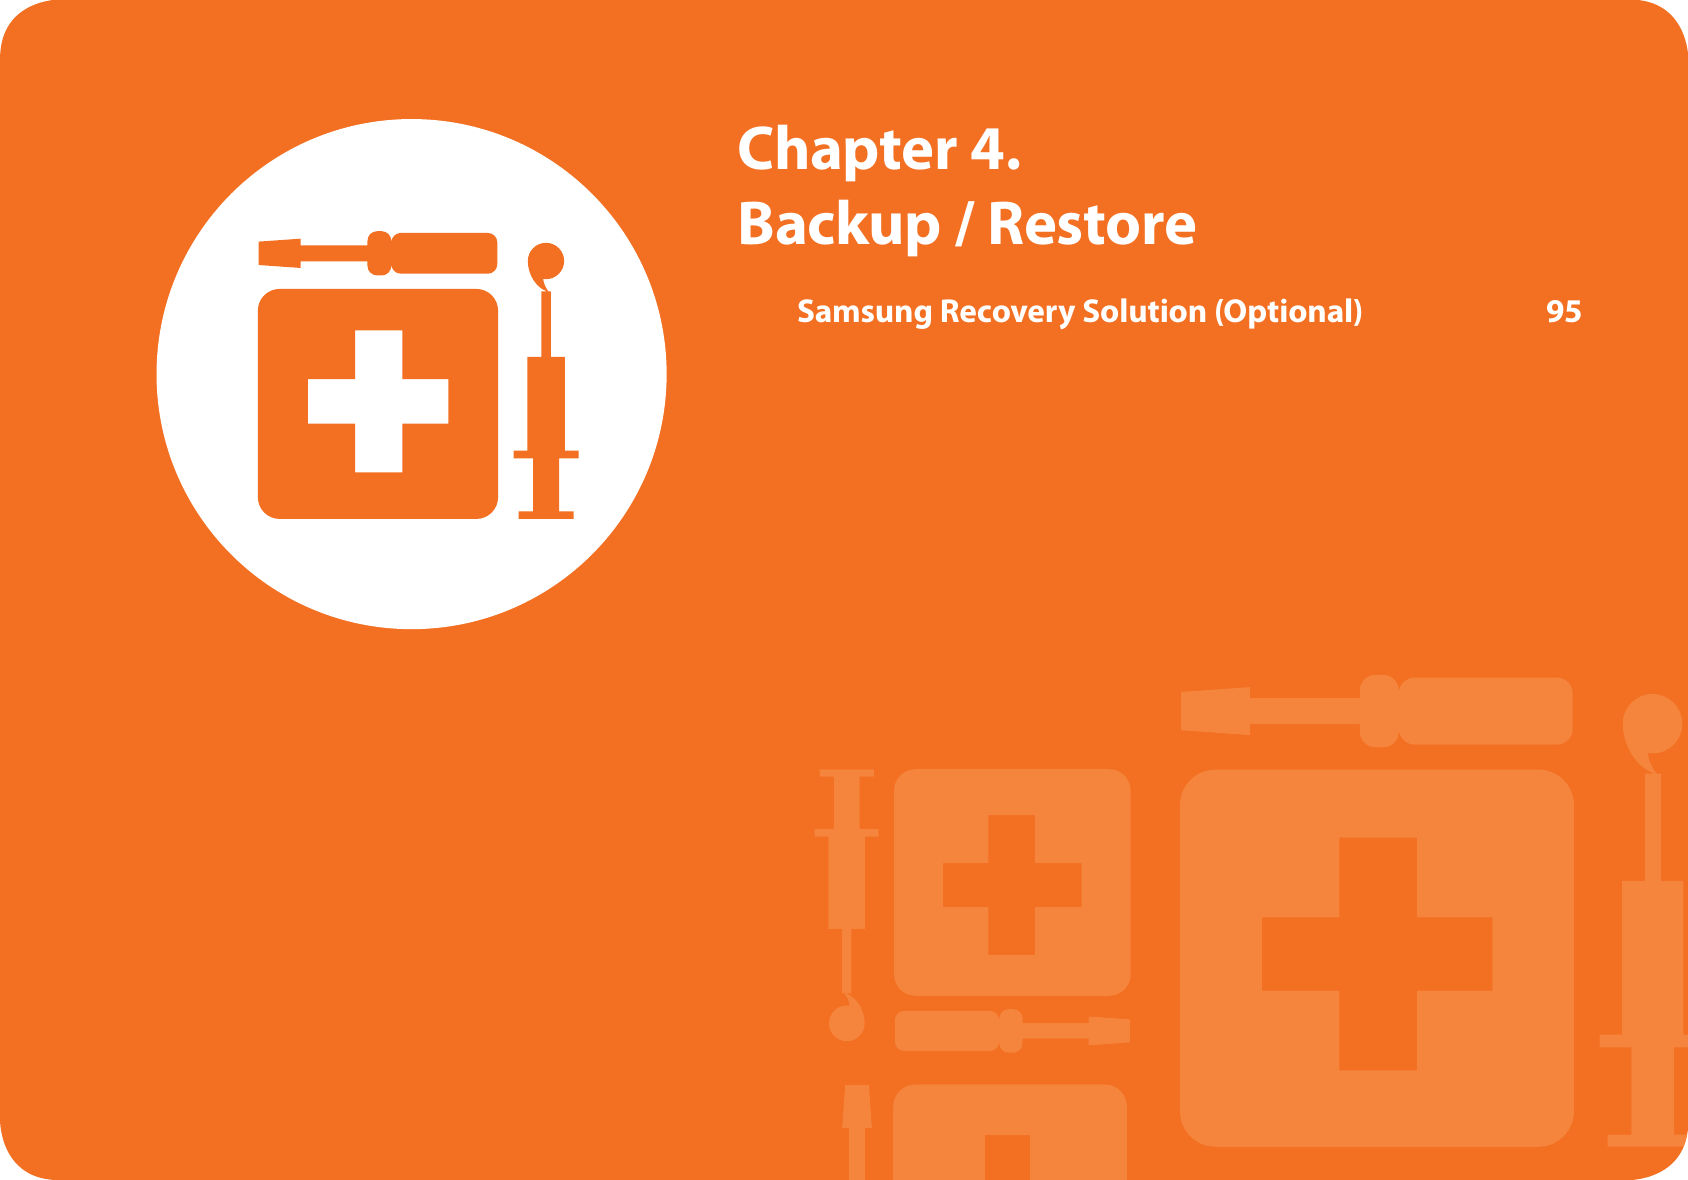  Chapter  4. Backup / RestoreSamsung Recovery Solution (Optional)  95